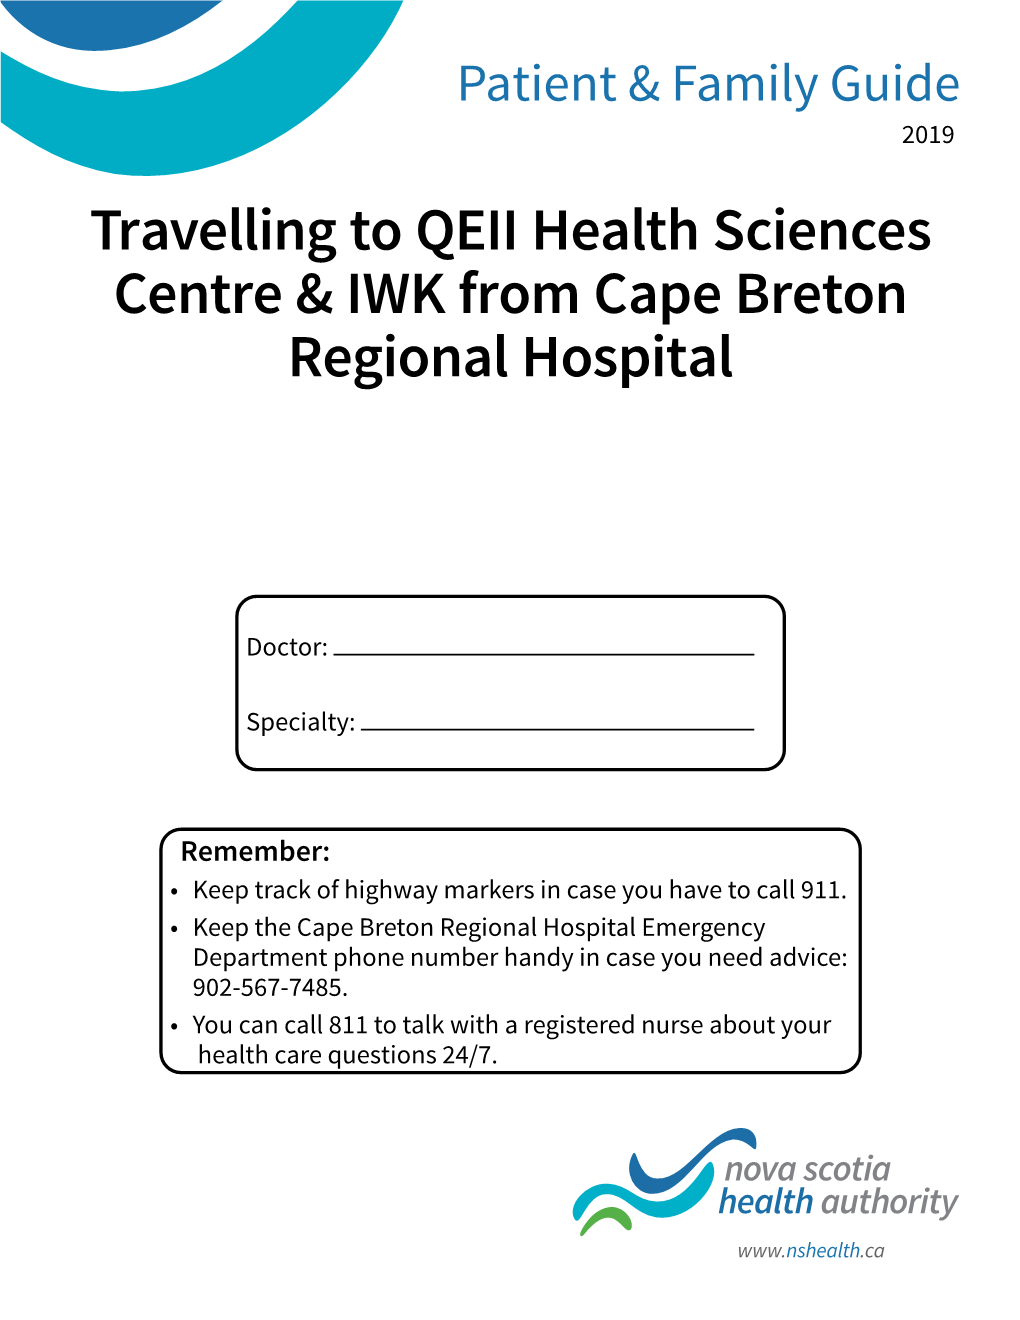 Travelling to QEII Health Sciences Centre & IWK from Cape Breton